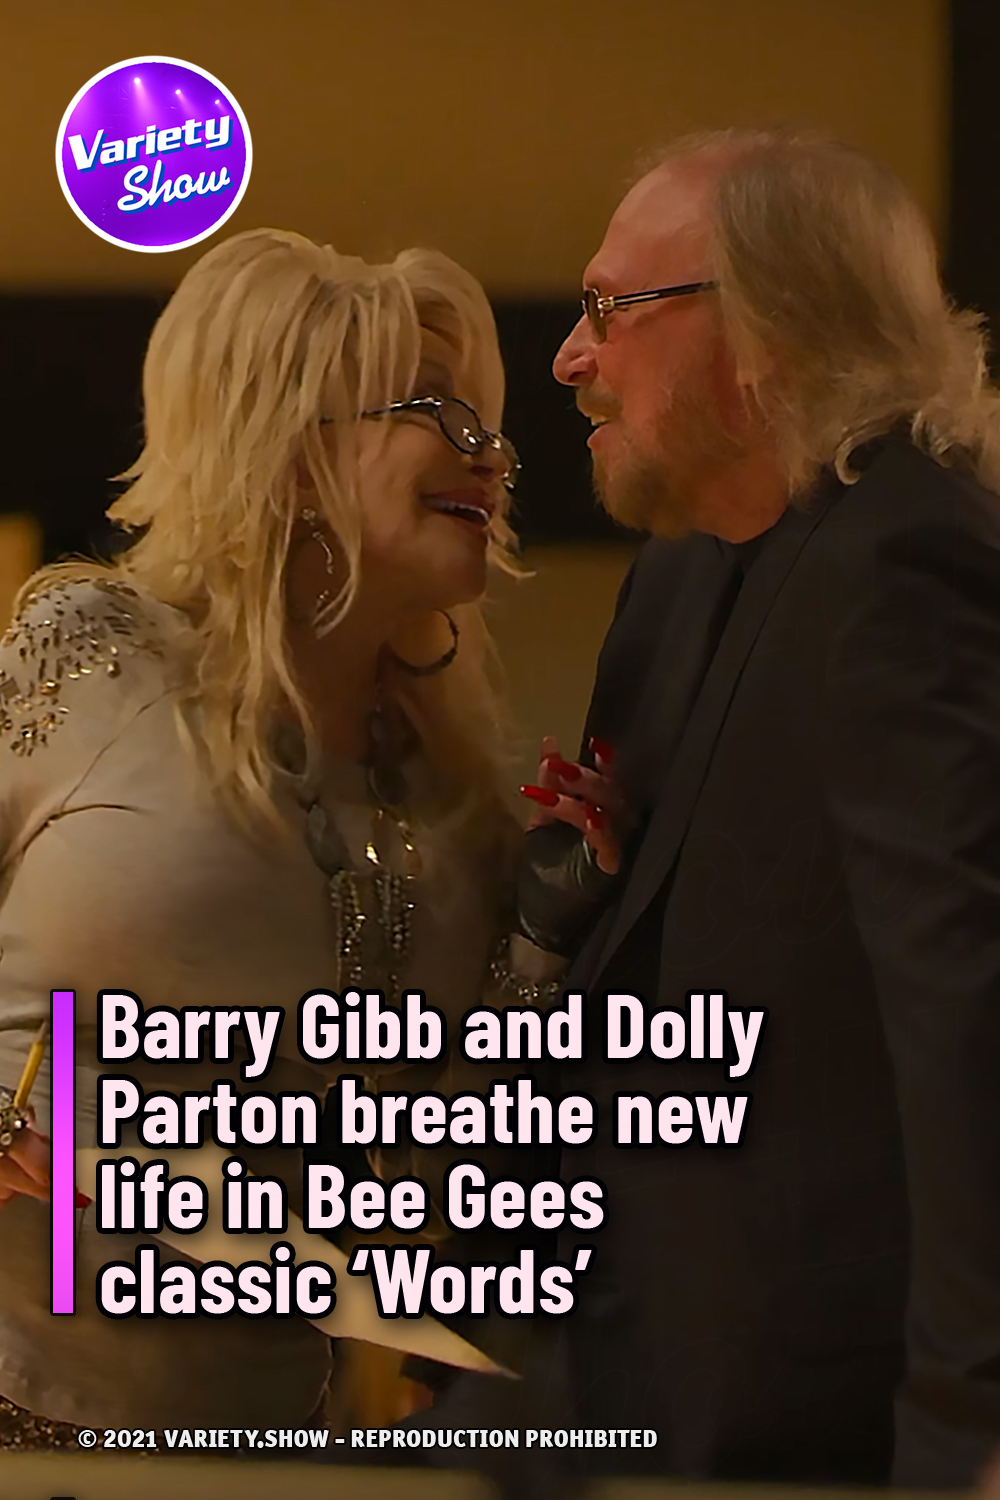 Barry Gibb and Dolly Parton breathe new life in Bee Gees classic ‘Words’